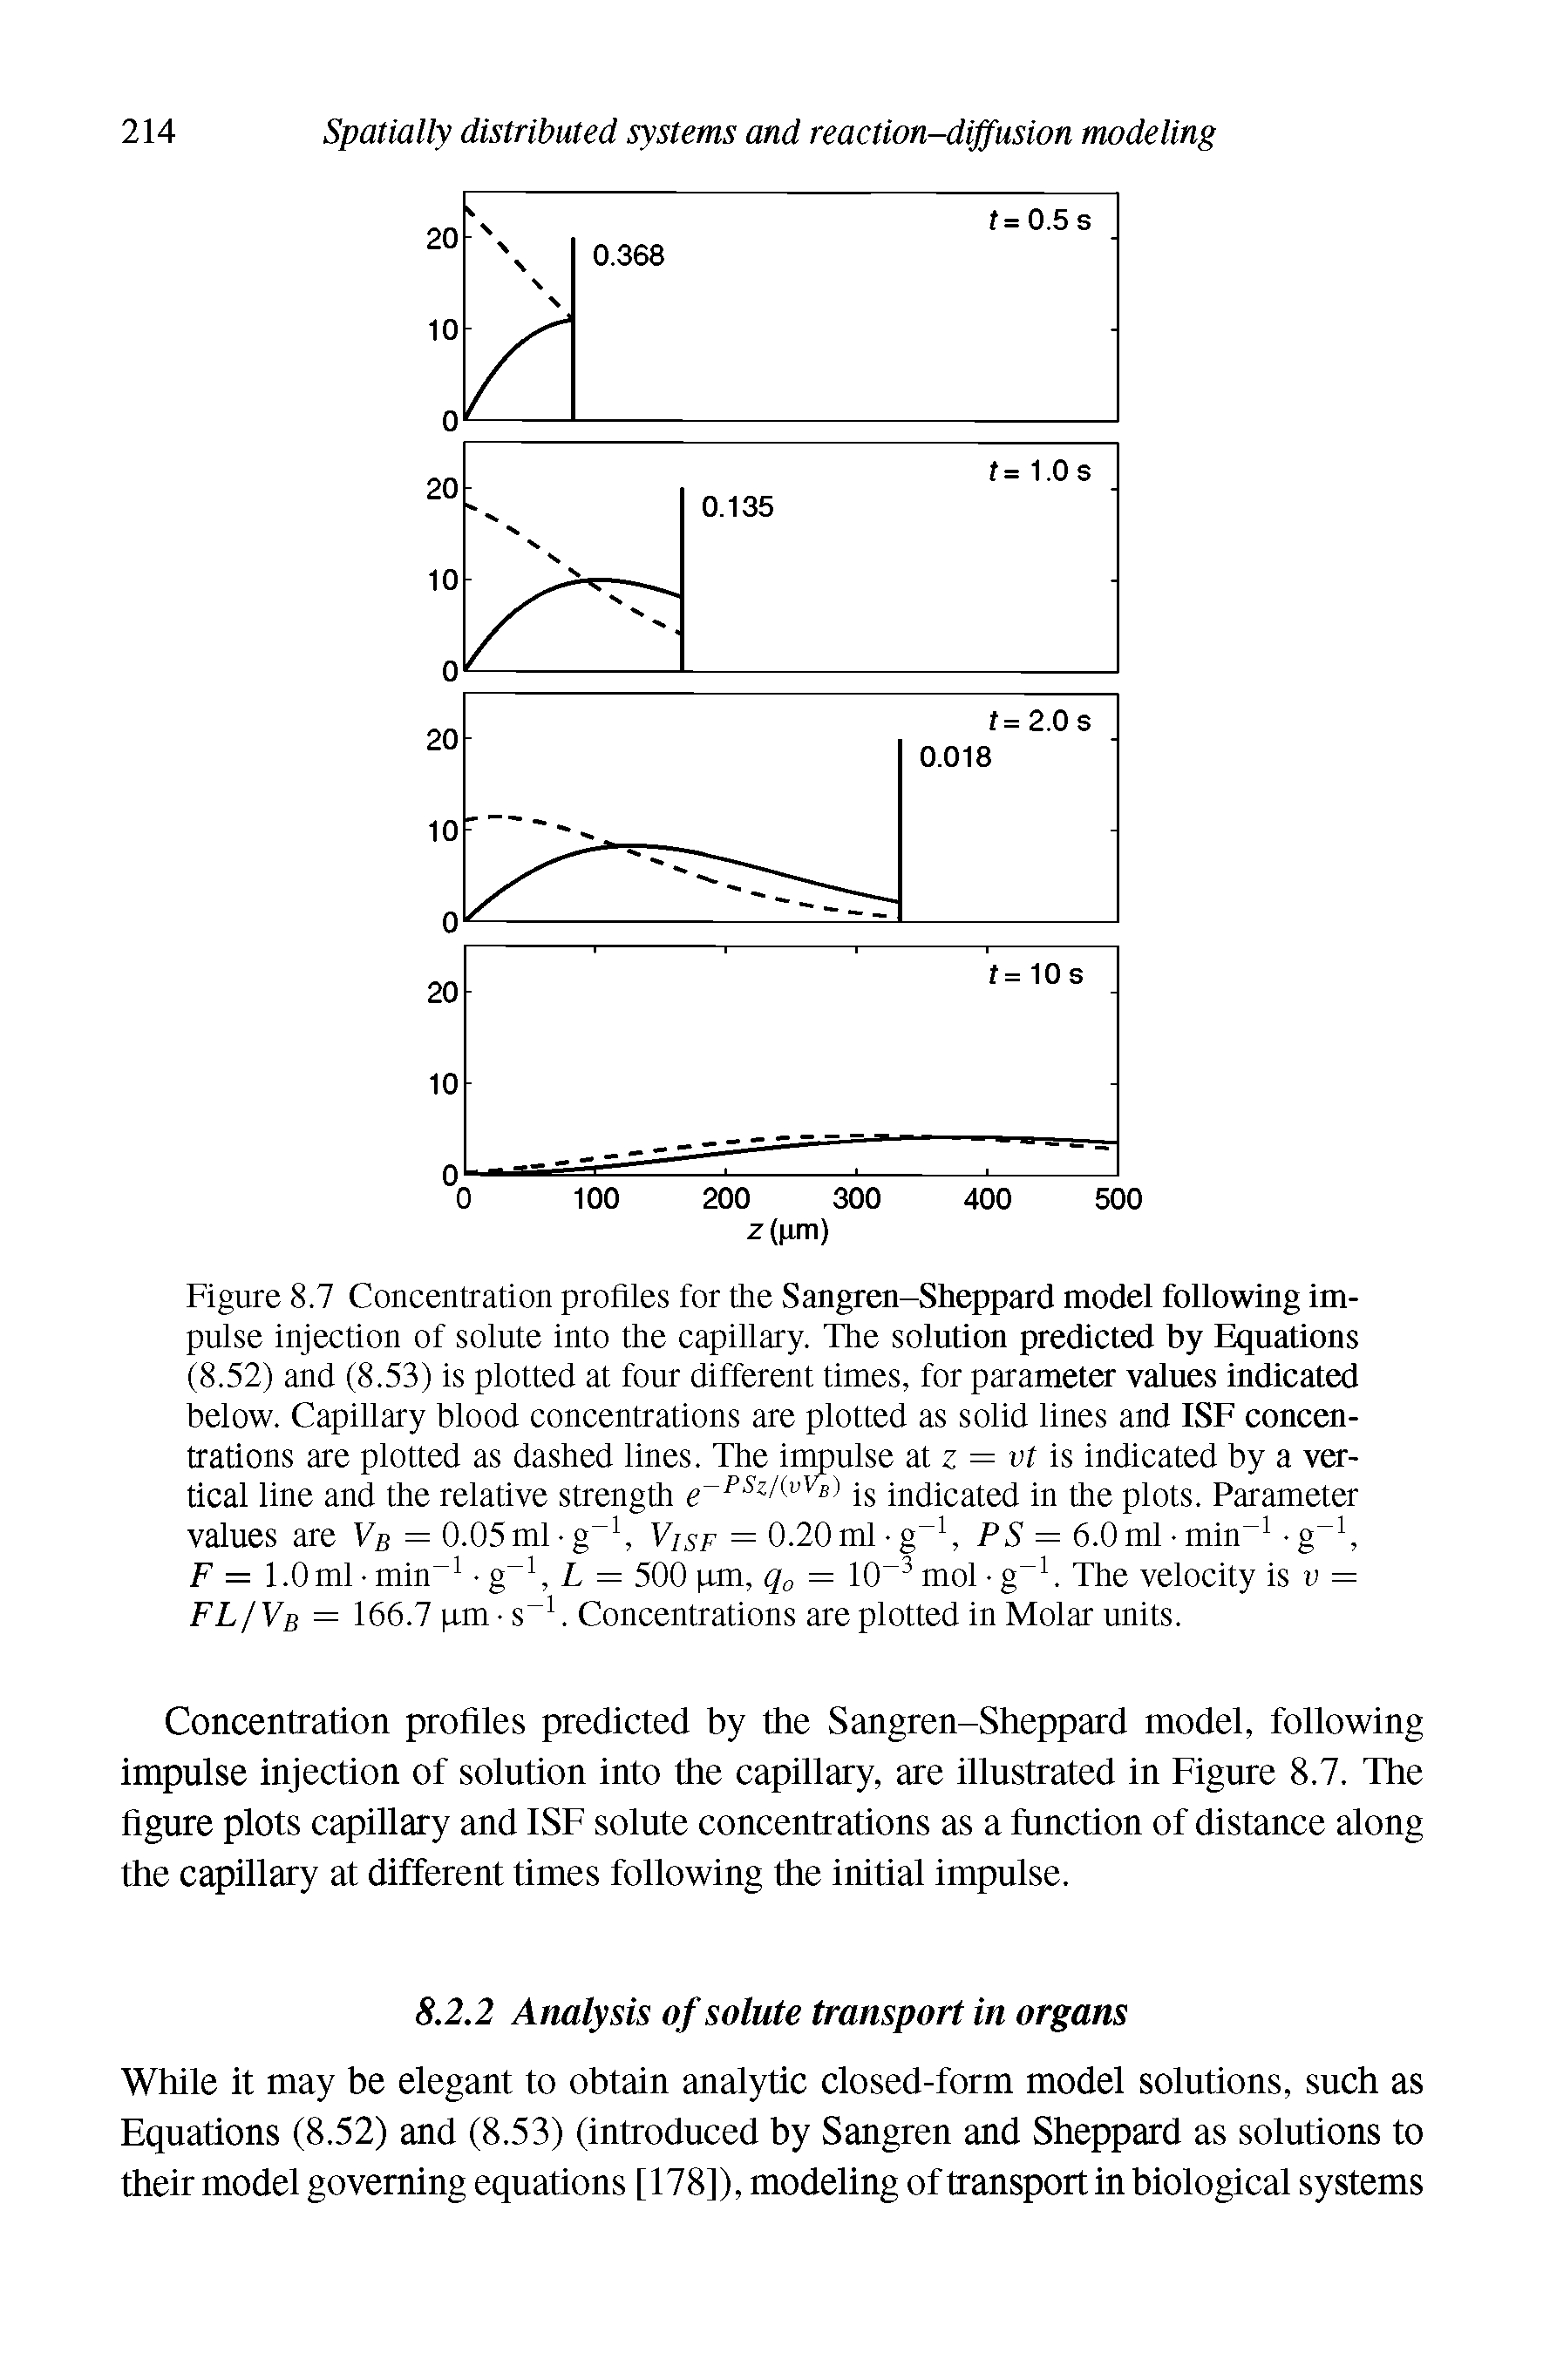 Figure 8.7 Concentration profiles for the Sangren-Sheppard model following impulse injection of solute into the capillary. The solution predicted by Equations (8.52) and (8.53) is plotted at four different times, for parameter values indicated below. Capillary blood concentrations are plotted as solid lines and ISF concentrations are plotted as dashed lines. The impulse at z = vt is indicated by a vertical line and the relative strength e-ps /(vVs) is indicated in the plots. Parameter values are Vb = 0.05ml -g 1, V sf = 0.20ml-g 1, PS = 6.0ml-min 1 -g 1, F = 1.0 ml min-1 g-1, L = 500 qm, q0 = 10 3 mol g 1. The velocity is v = FL/Vb = 166.7 qm - s 1. Concentrations are plotted in Molar units.